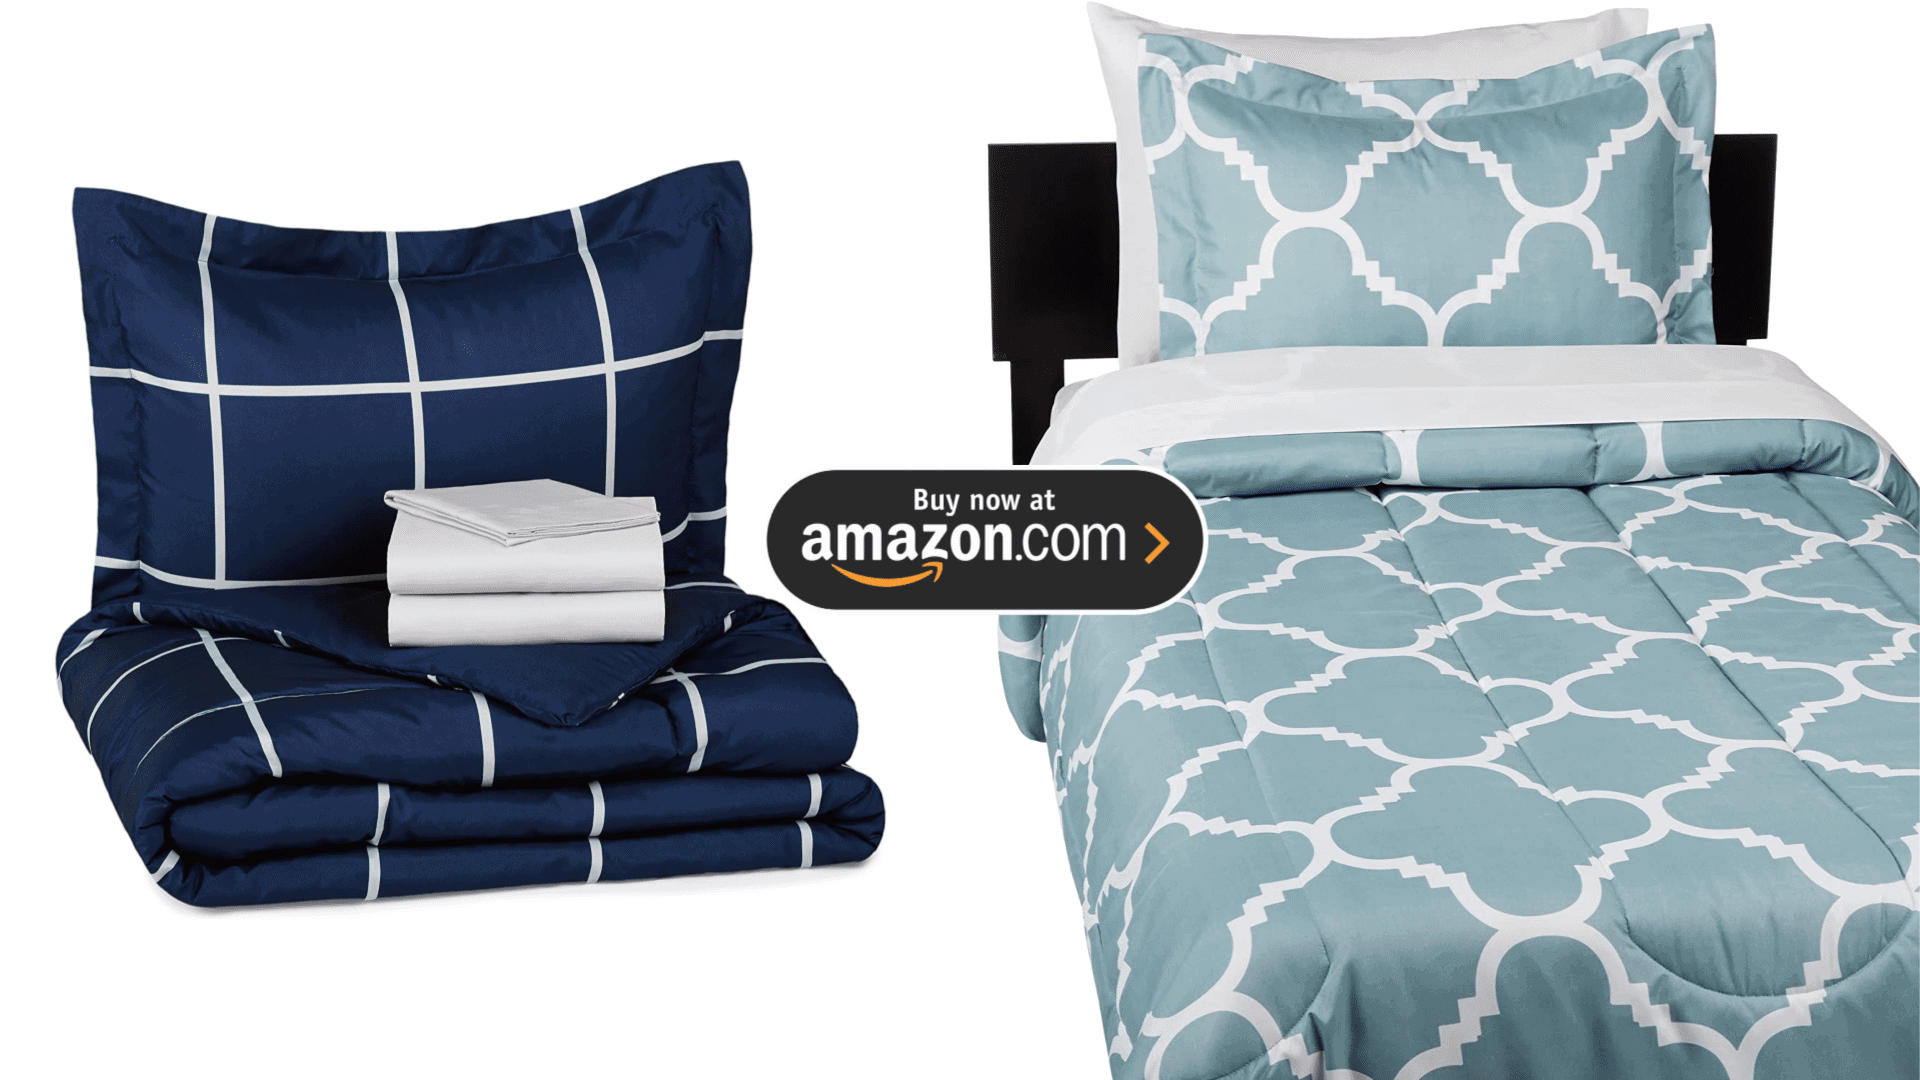 https://collegesofdistinction.com/wp-content/uploads/2020/06/AmazonBasics-5-Piece-Light-Weight-Microfiber-Bed-In-A-Bag-Comforter-Bedding-Set-%E2%80%93-Twin-or-Twin-XL.png